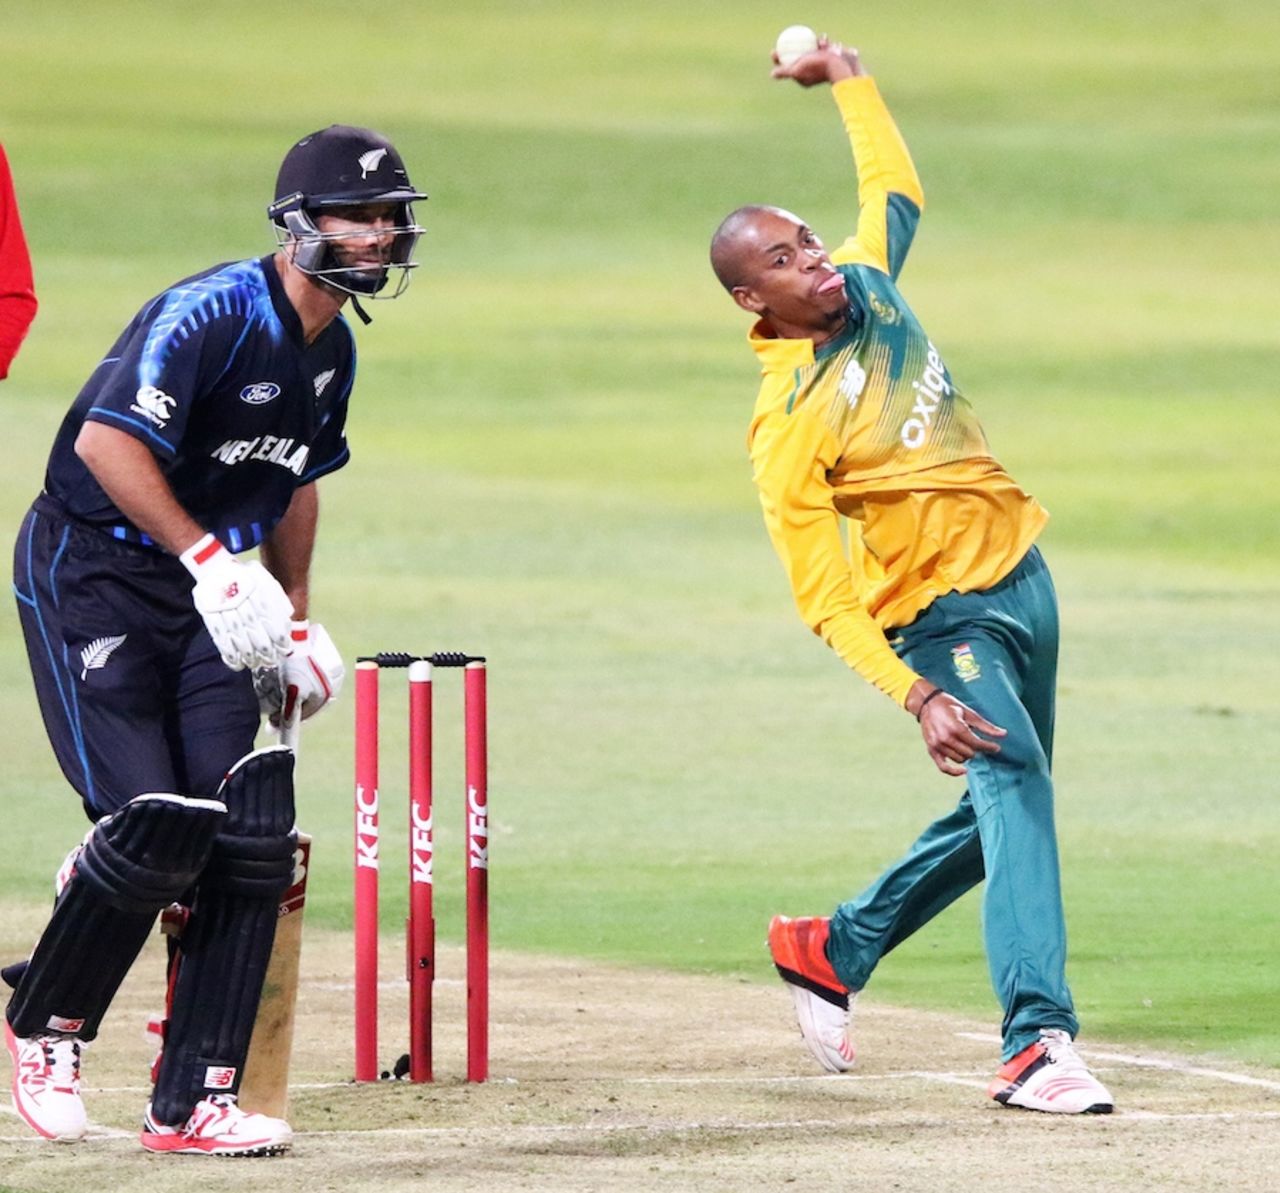 Aaron Phangiso bowled nine dots and gave three boundaries, South Africa v New Zealand, 1st T20I, Durban, August 14, 2015